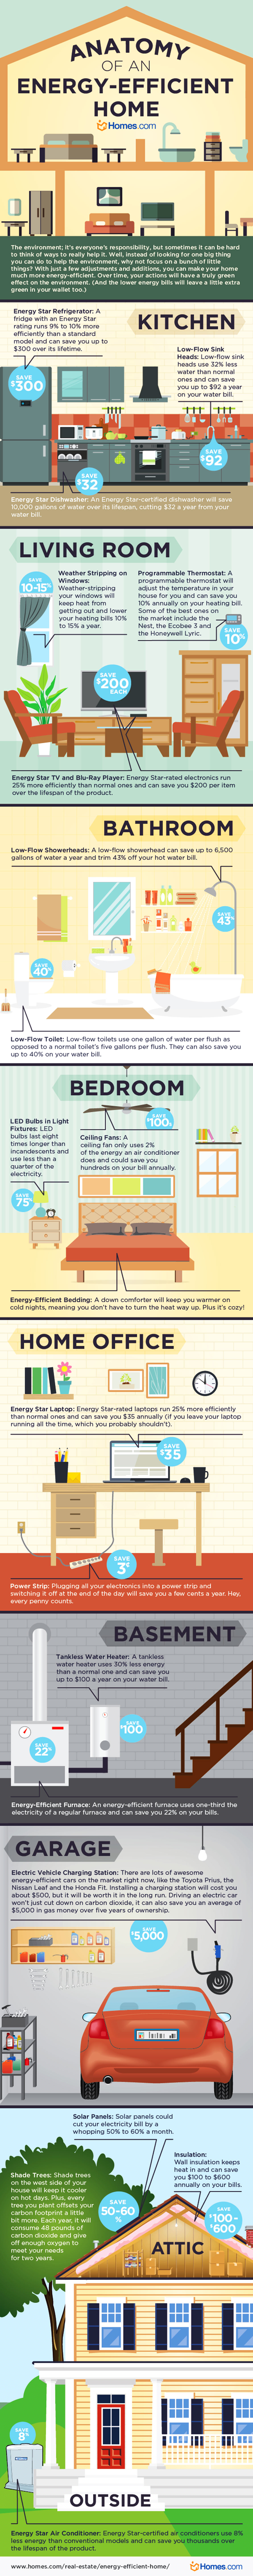 How to Build an Energy Efficient Home Infographic